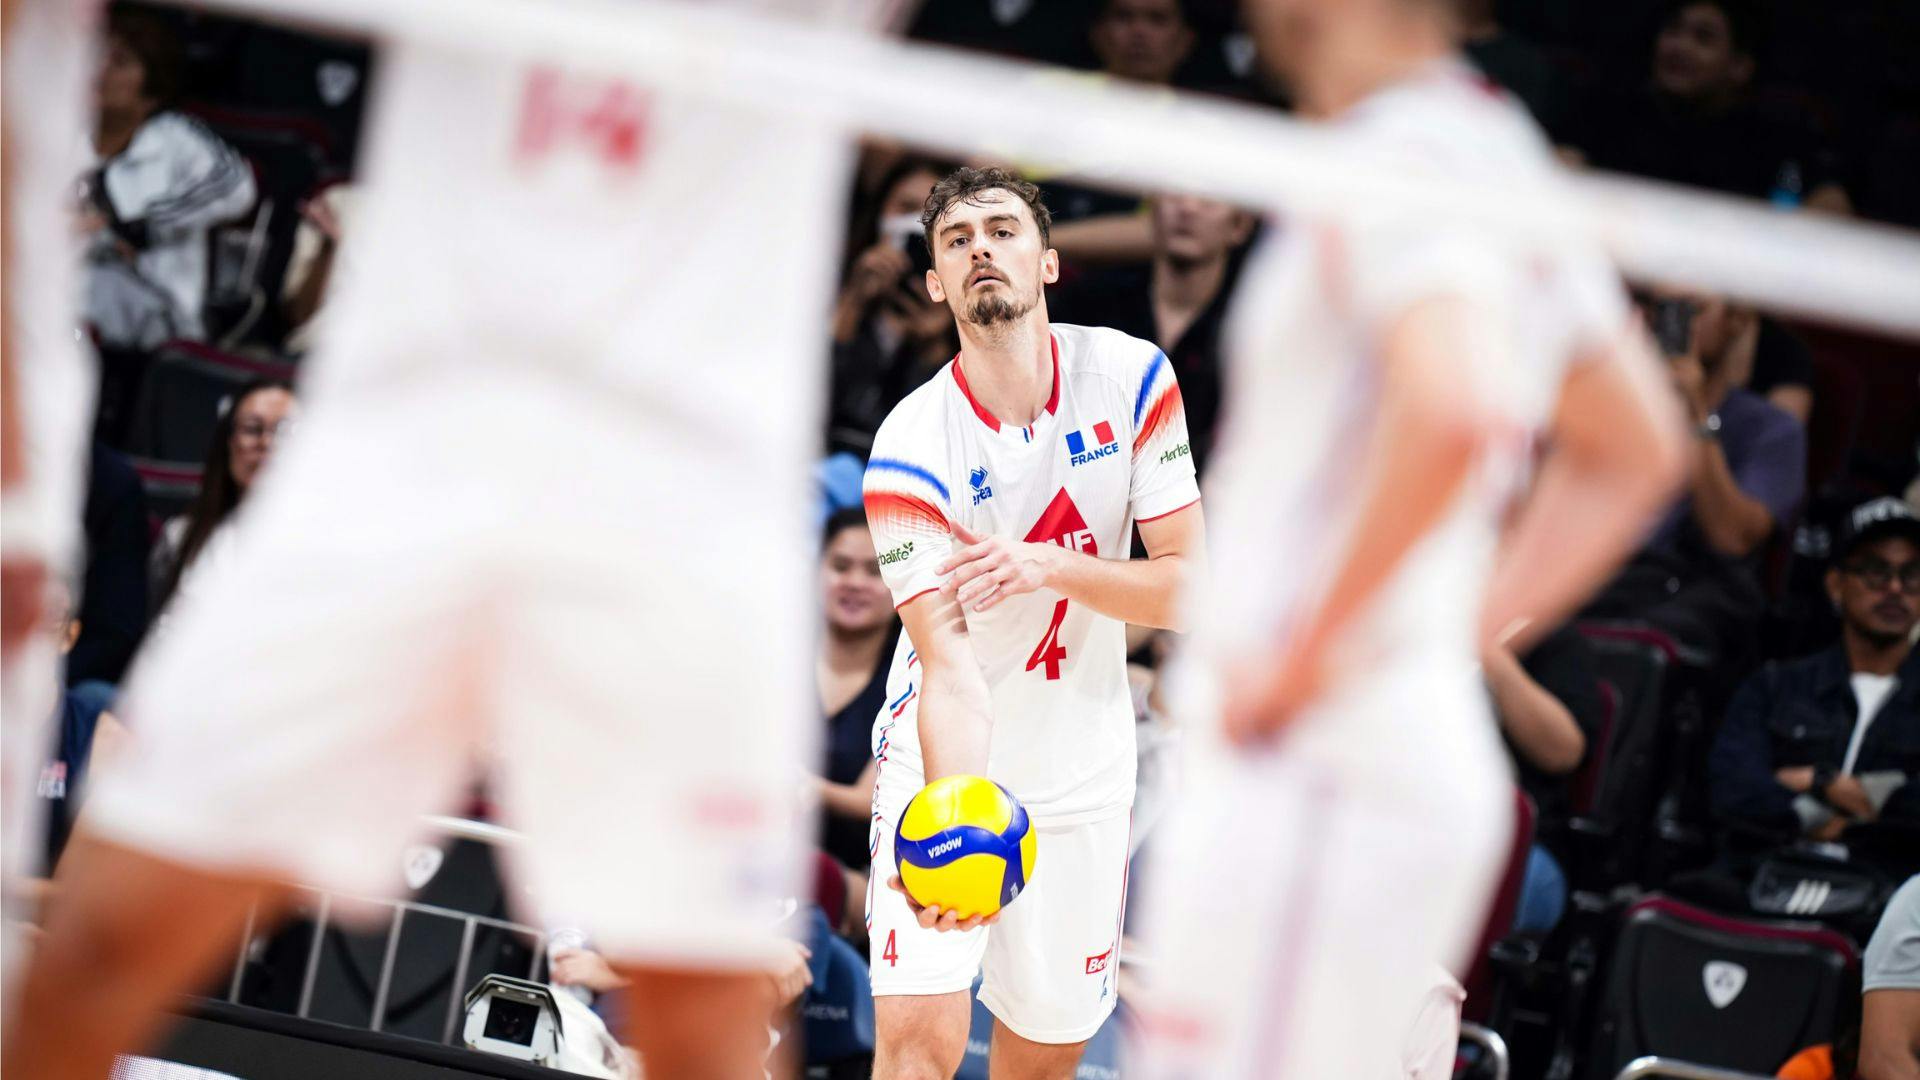 VNL: Jean Patry feels support of ‘amazing’ Filipino fans after France’s bounce-back win in Manila Leg
